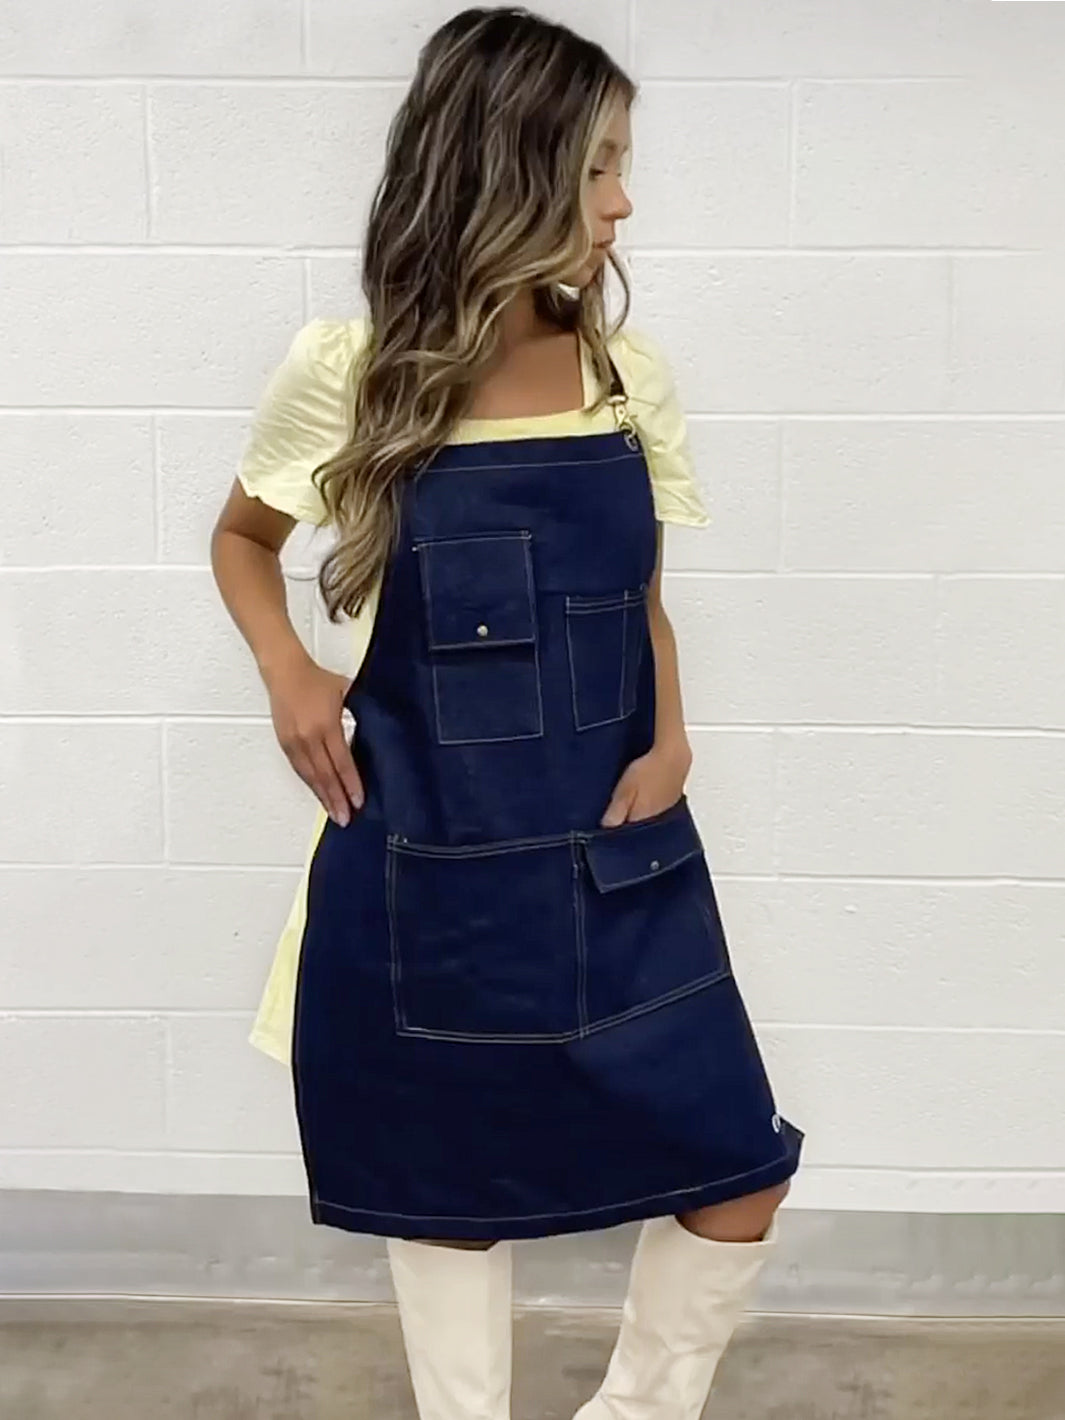 Denim Apron in Green and Gray with Stylish Pockets and More